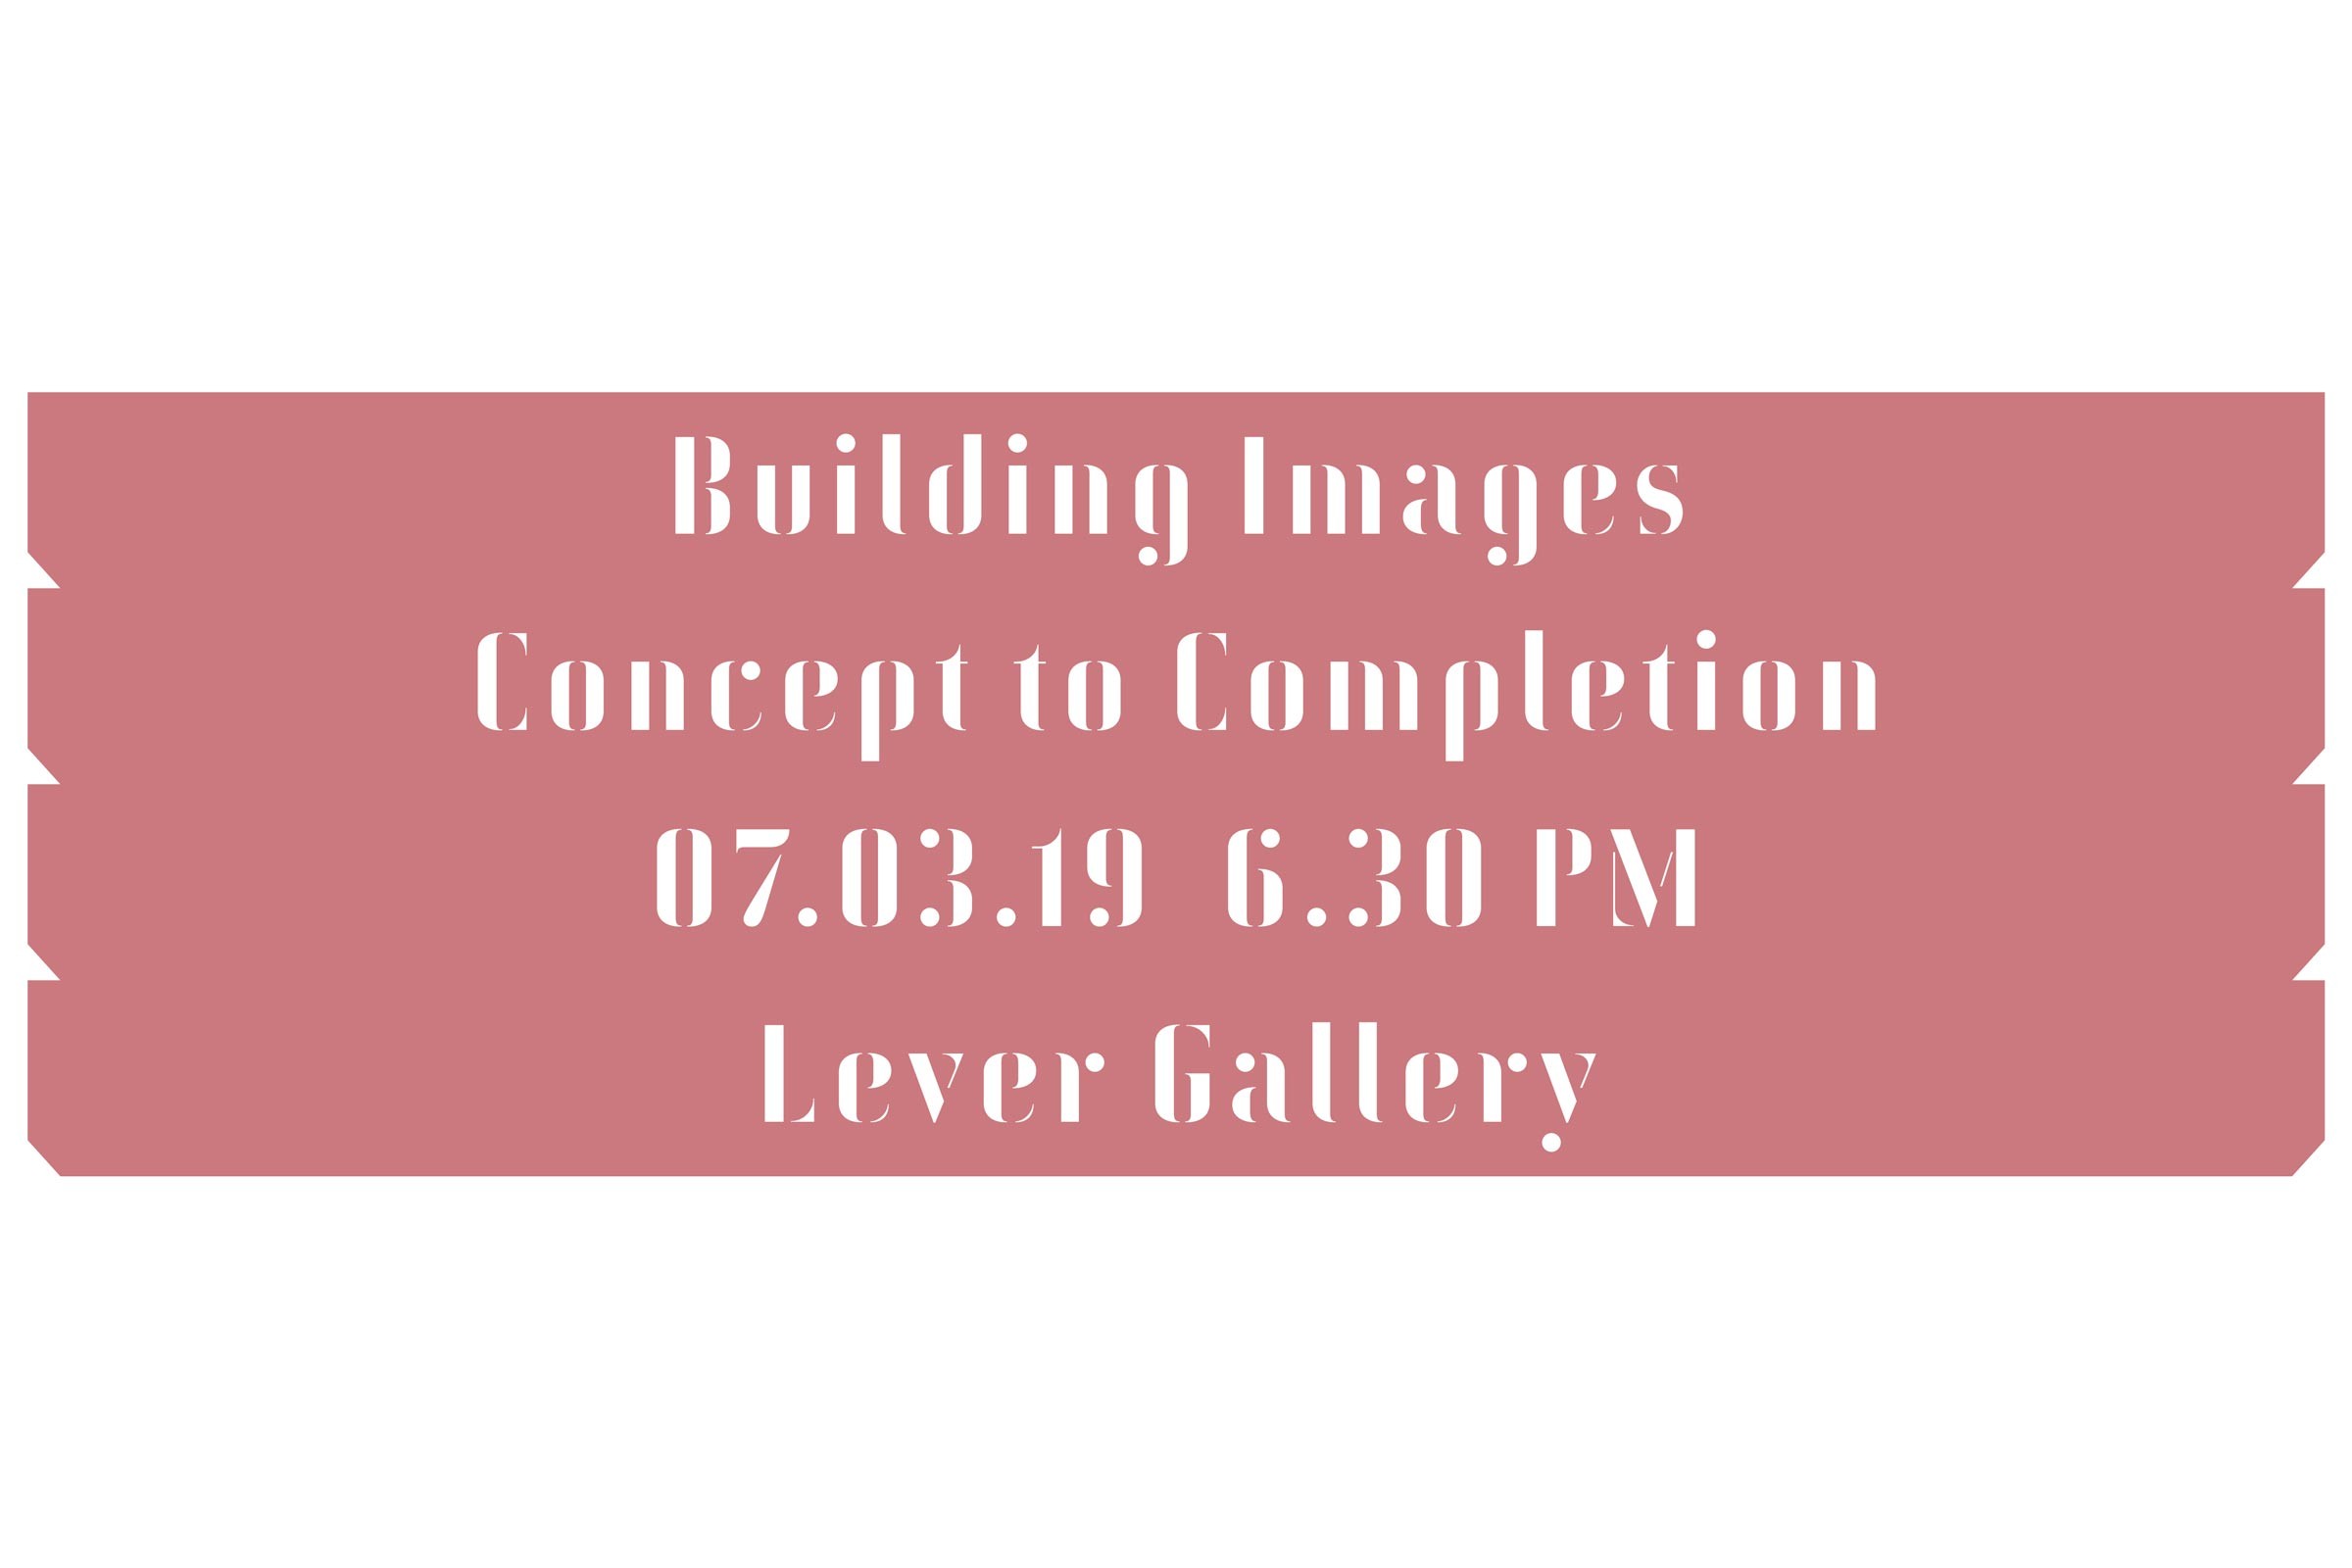 Building Images: Concept to Completion Panel Discussion